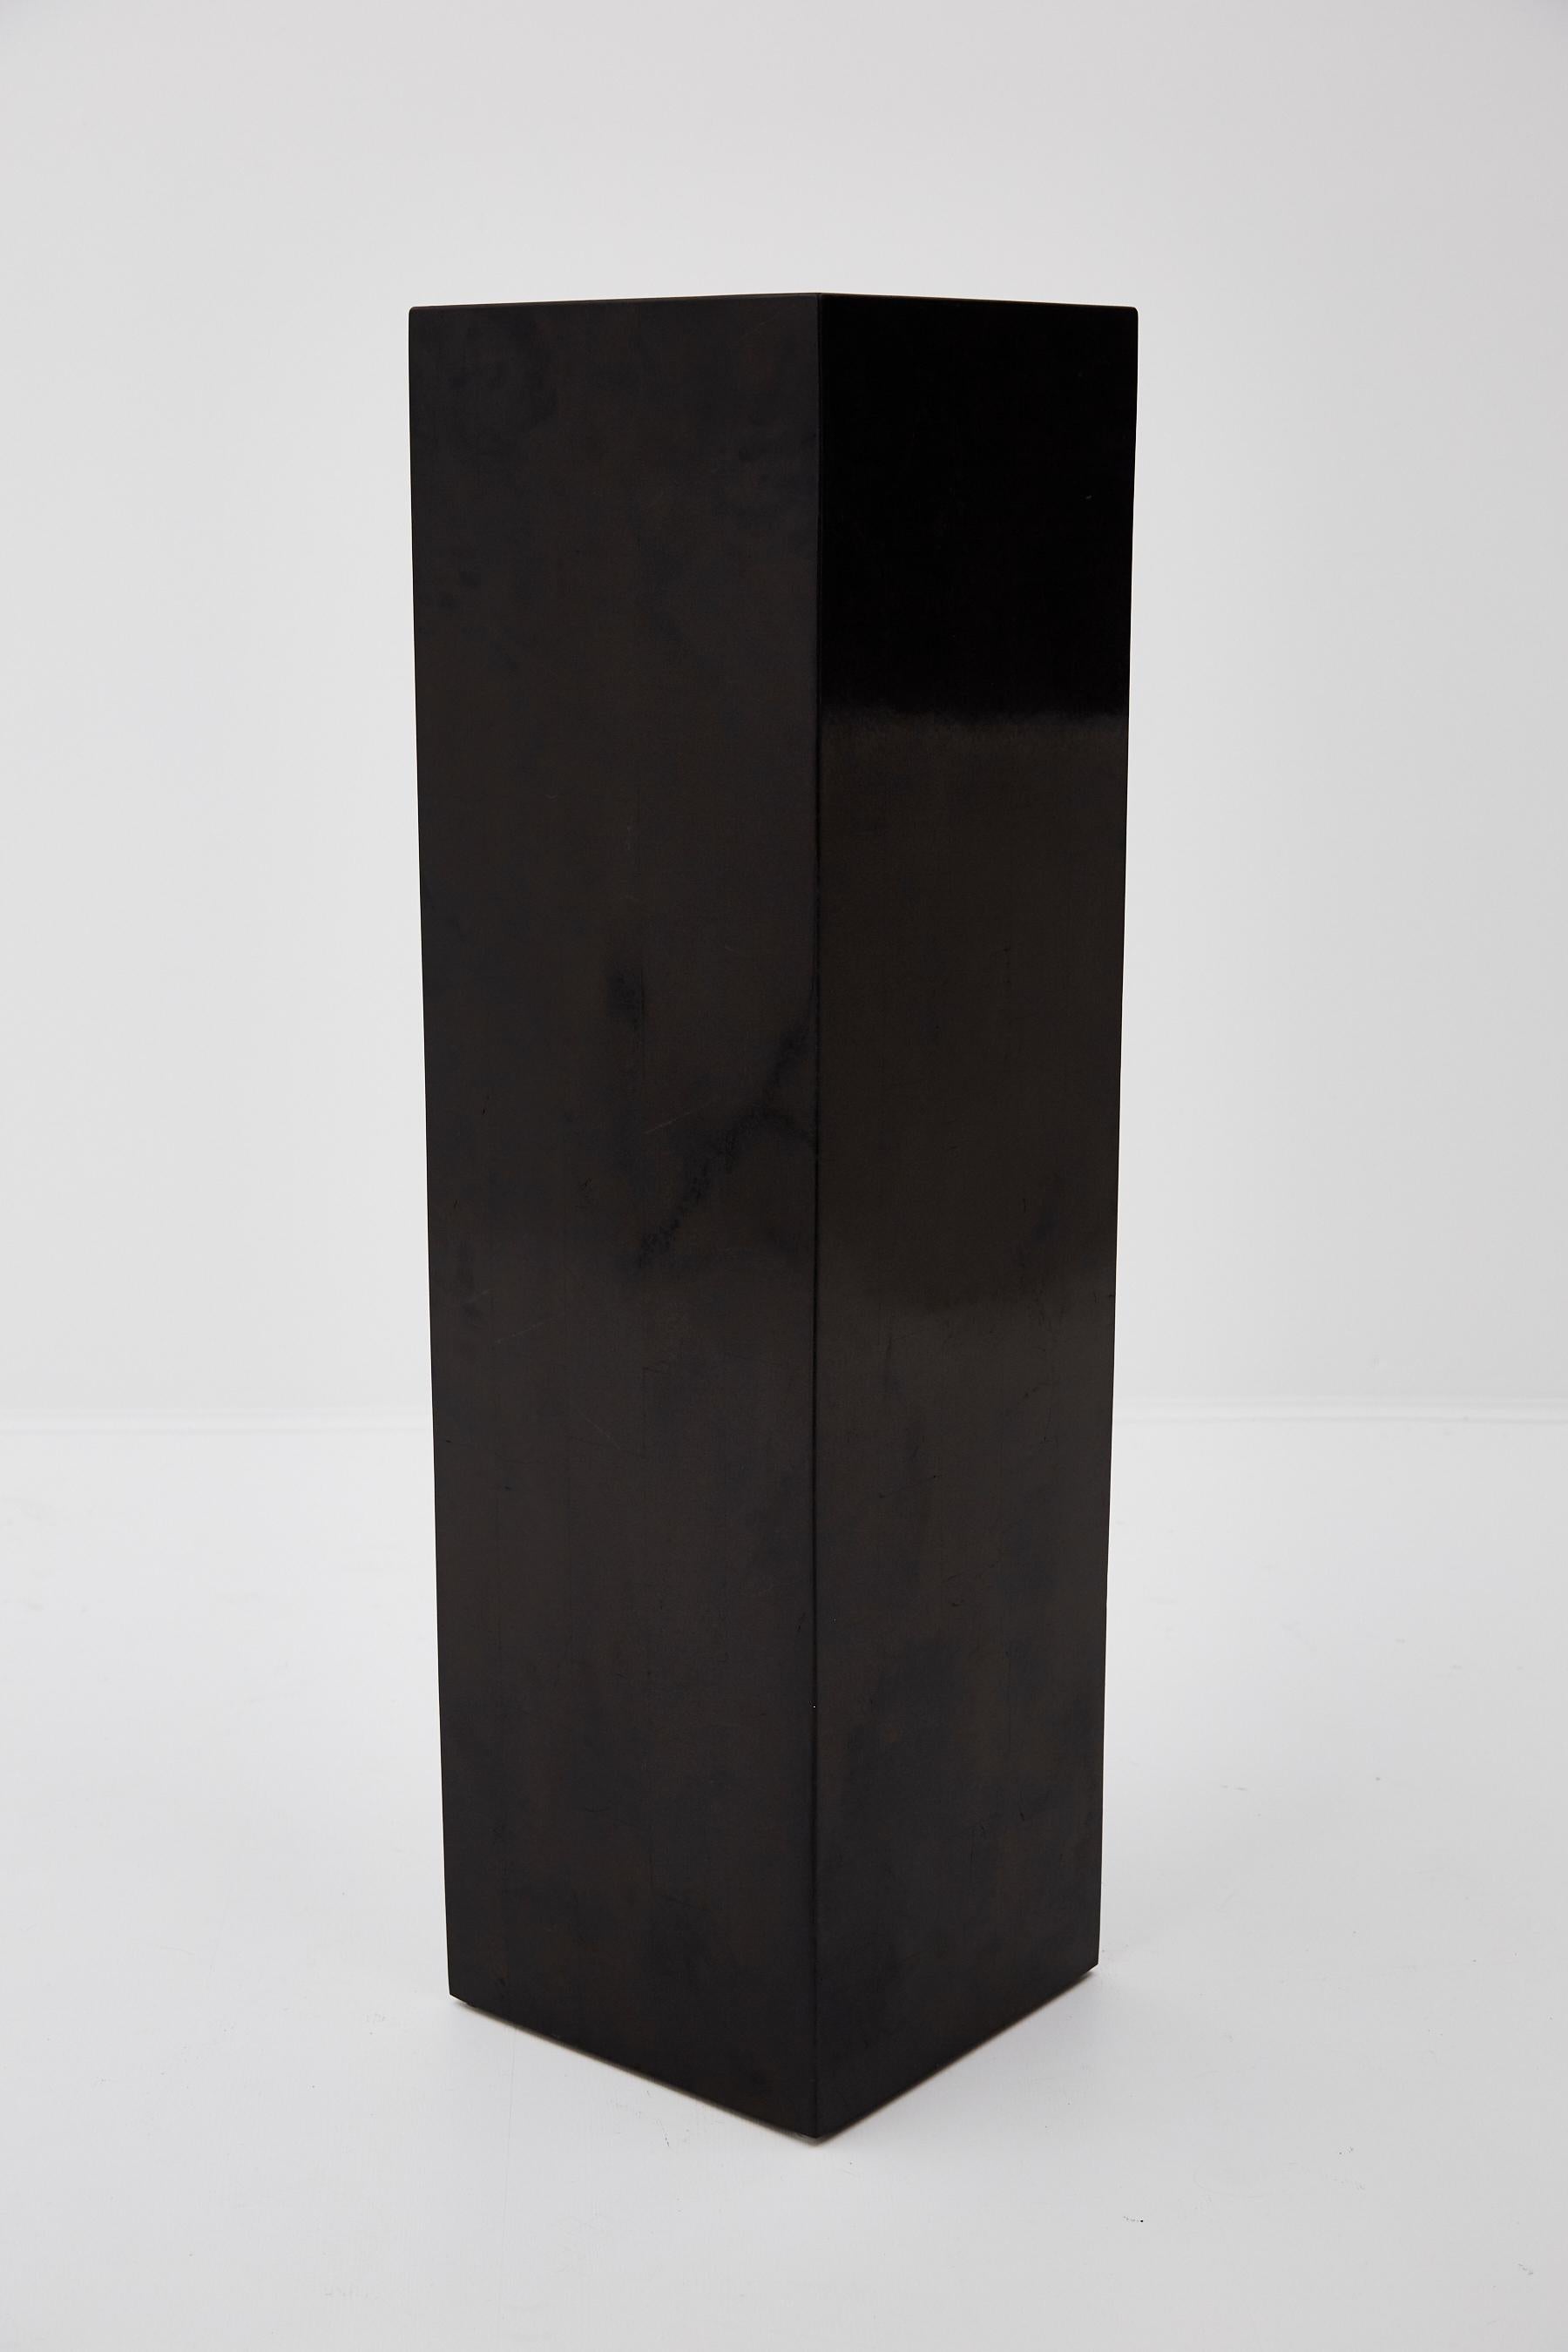 Black tessellated stone square pedestal. 

Measures: 42 inches tall.